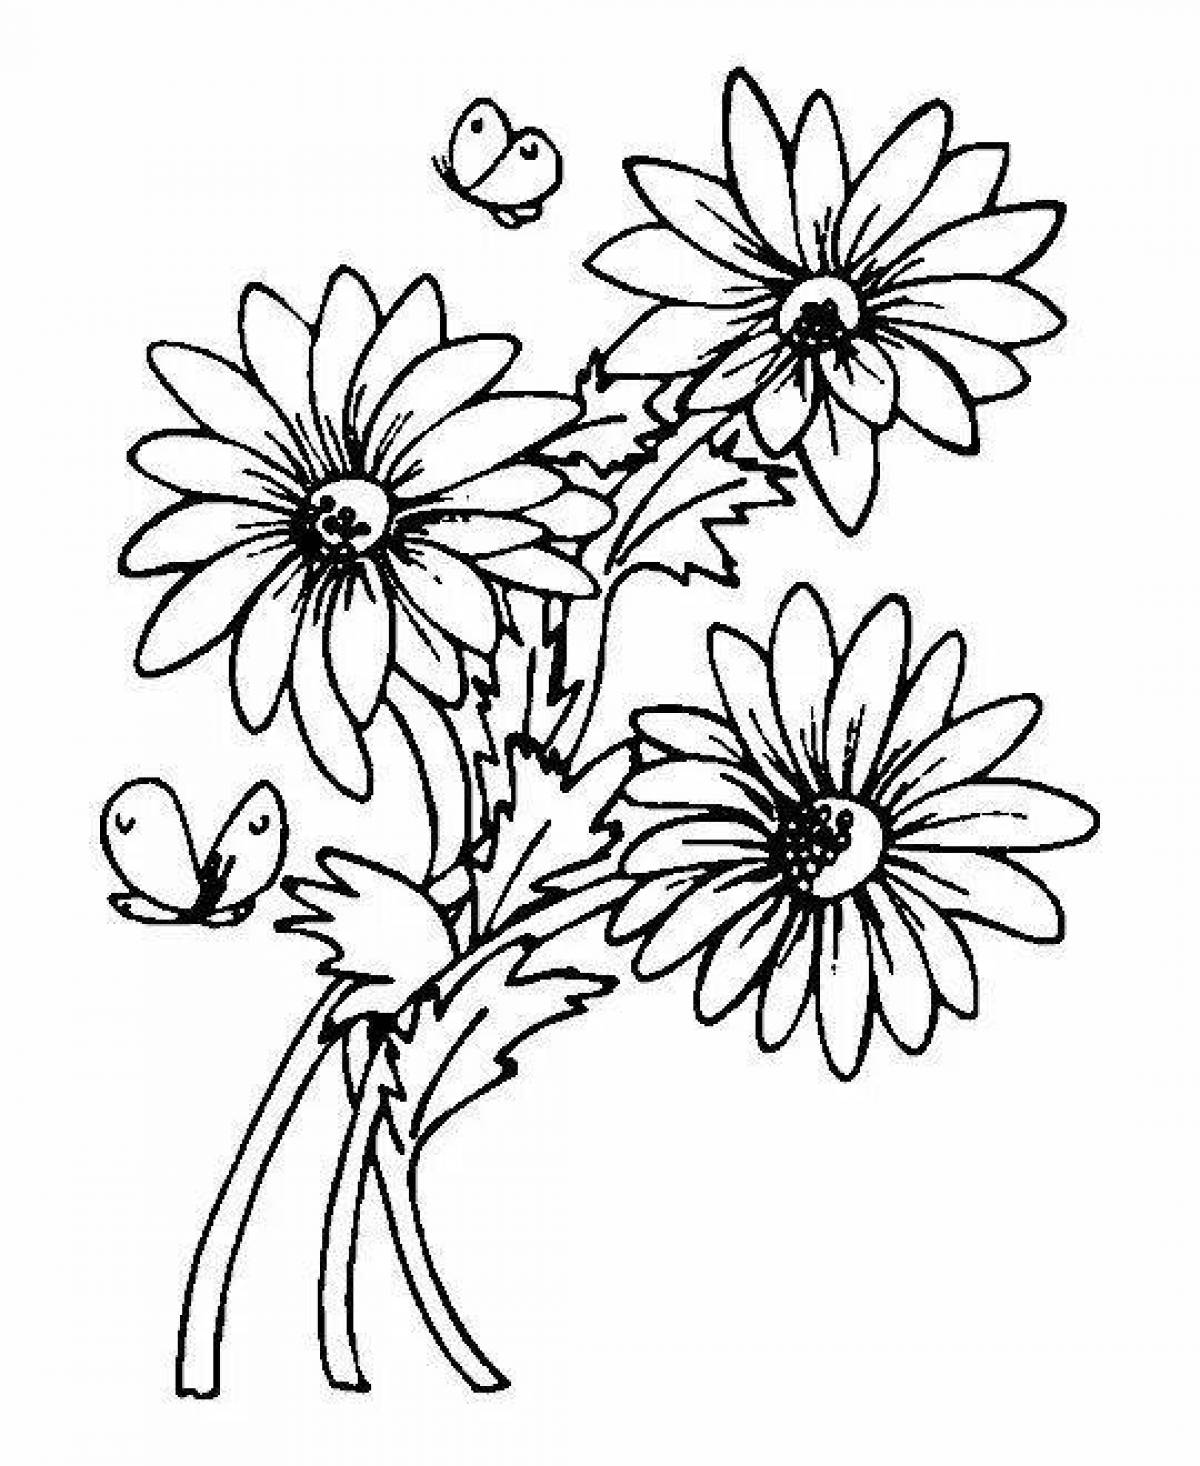 Coloring page delightful bouquet of daisies